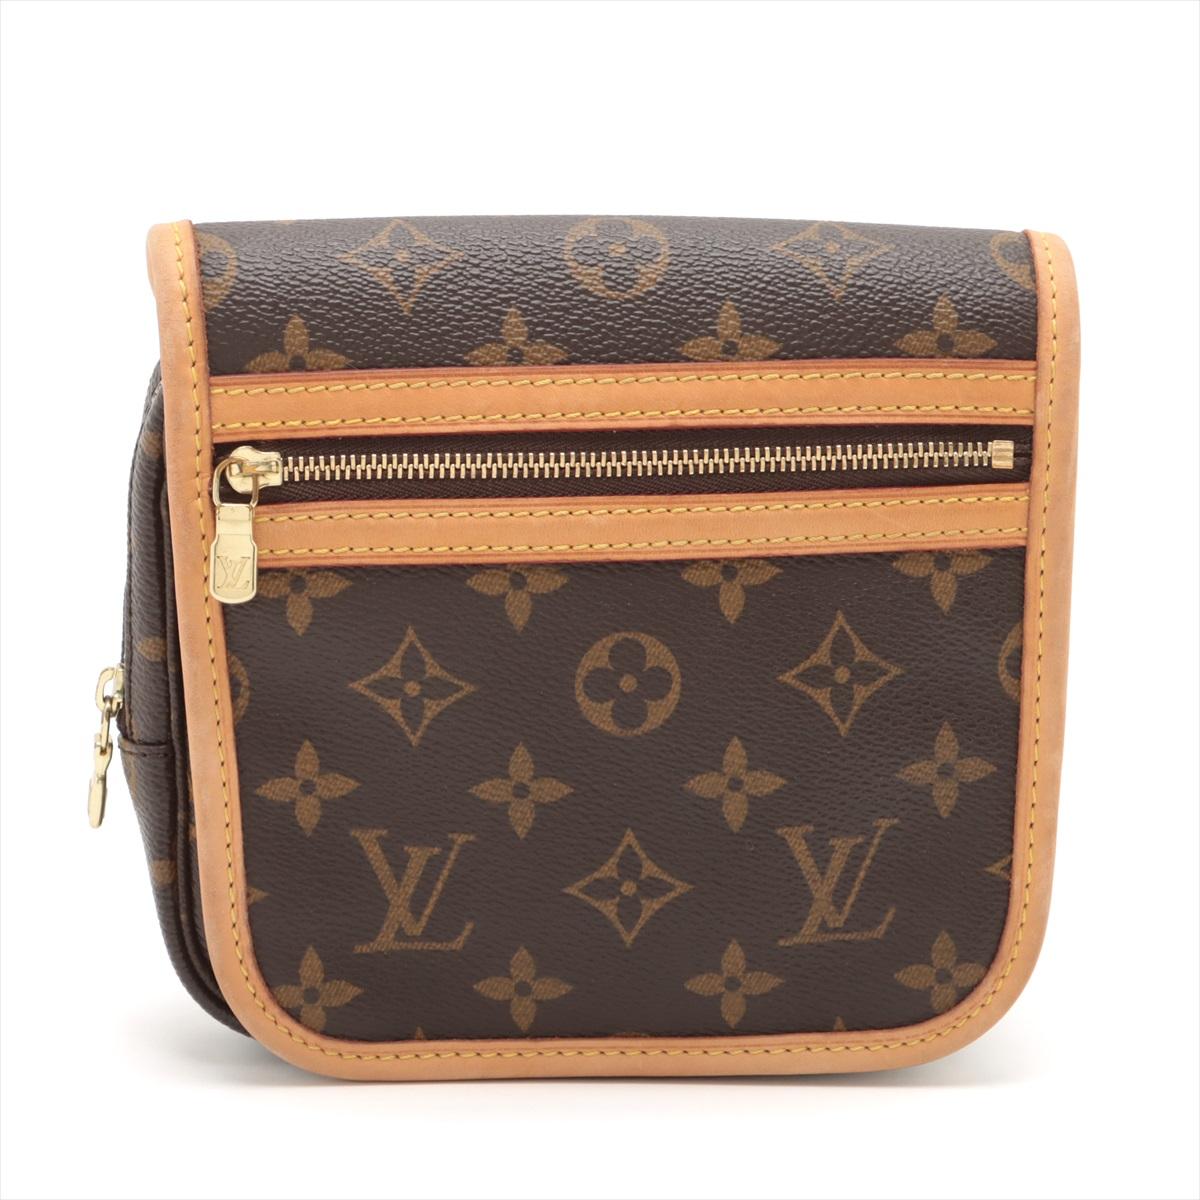 The Louis Vuitton Monogram Bum Bag Bosphore is a stylish and versatile accessory designed for modern convenience. Crafted from the iconic Monogram canvas, the bag features signature LV pattern, synonymous with luxury and sophistication. Its compact